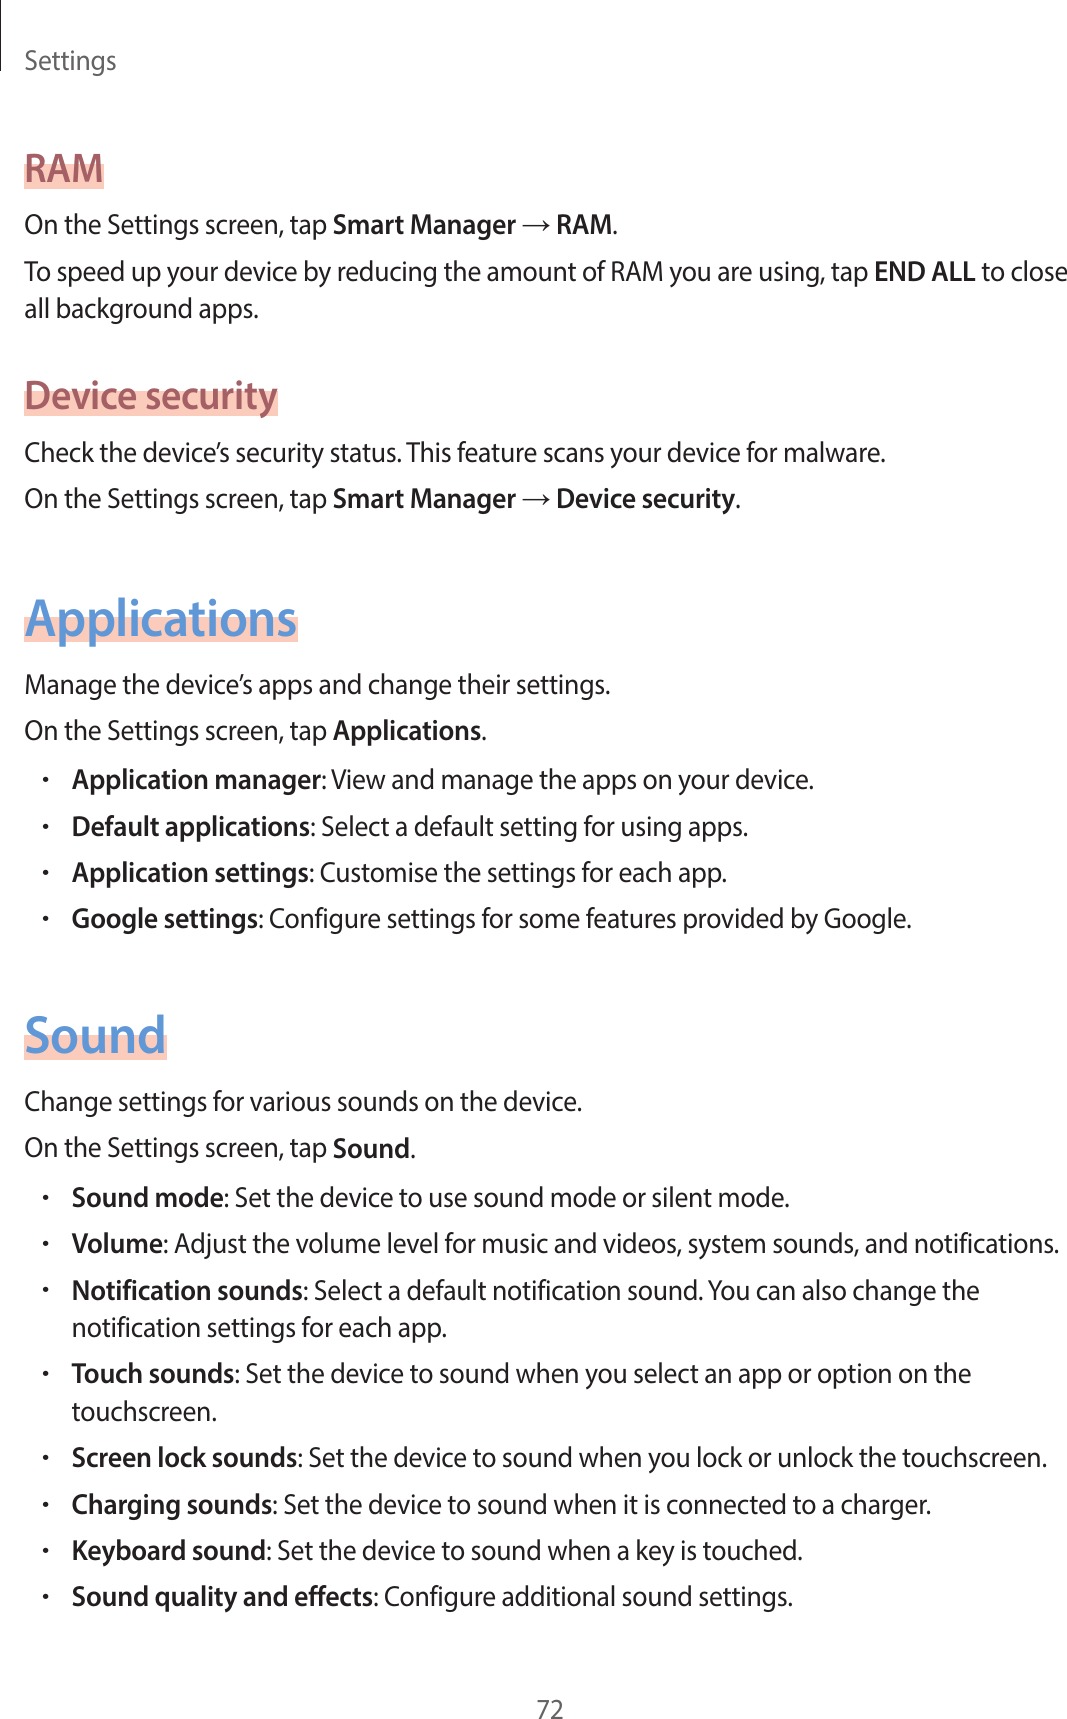 Settings72RAMOn the Settings screen, tap Smart Manager → RAM.To speed up your device by reducing the amount of RAM you are using, tap END ALL to close all background apps.Device securityCheck the device’s security status. This feature scans your device for malware.On the Settings screen, tap Smart Manager → Device security.ApplicationsManage the device’s apps and change their settings.On the Settings screen, tap Applications.•Application manager: View and manage the apps on your device.•Default applications: Select a default setting for using apps.•Application settings: Customise the settings for each app.•Google settings: Configure settings for some features provided by Google.SoundChange settings for various sounds on the device.On the Settings screen, tap Sound.•Sound mode: Set the device to use sound mode or silent mode.•Volume: Adjust the volume level for music and videos, system sounds, and notifications.•Notification sounds: Select a default notification sound. You can also change the notification settings for each app.•Touch sounds: Set the device to sound when you select an app or option on the touchscreen.•Screen lock sounds: Set the device to sound when you lock or unlock the touchscreen.•Charging sounds: Set the device to sound when it is connected to a charger.•Keyboard sound: Set the device to sound when a key is touched.•Sound quality and effects: Configure additional sound settings.